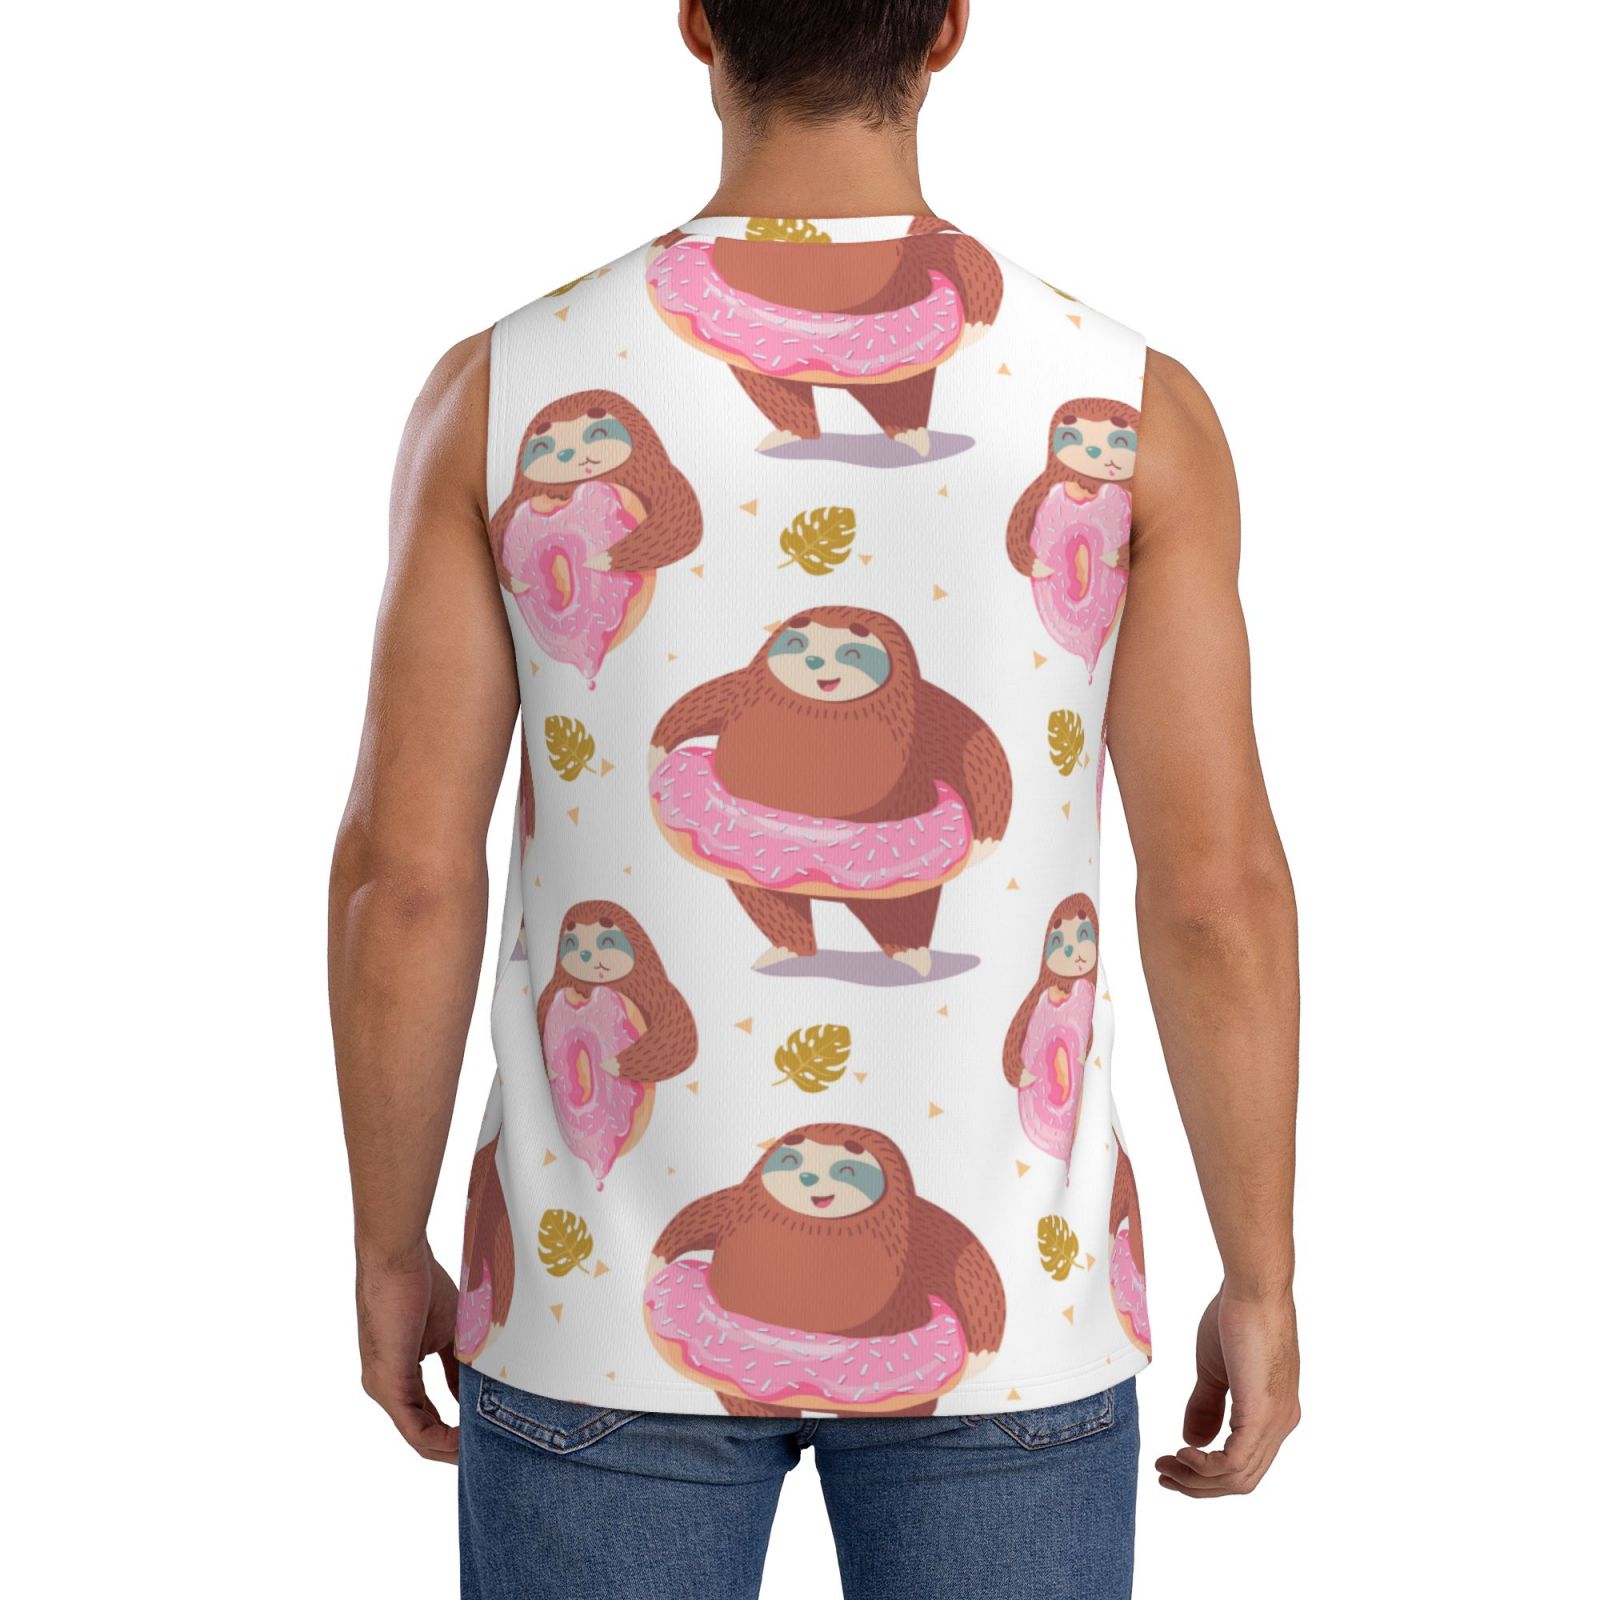 Gaeub Sloth with Donuts1 Men's Sleeveless Muscle Shirts Workout Tank ...